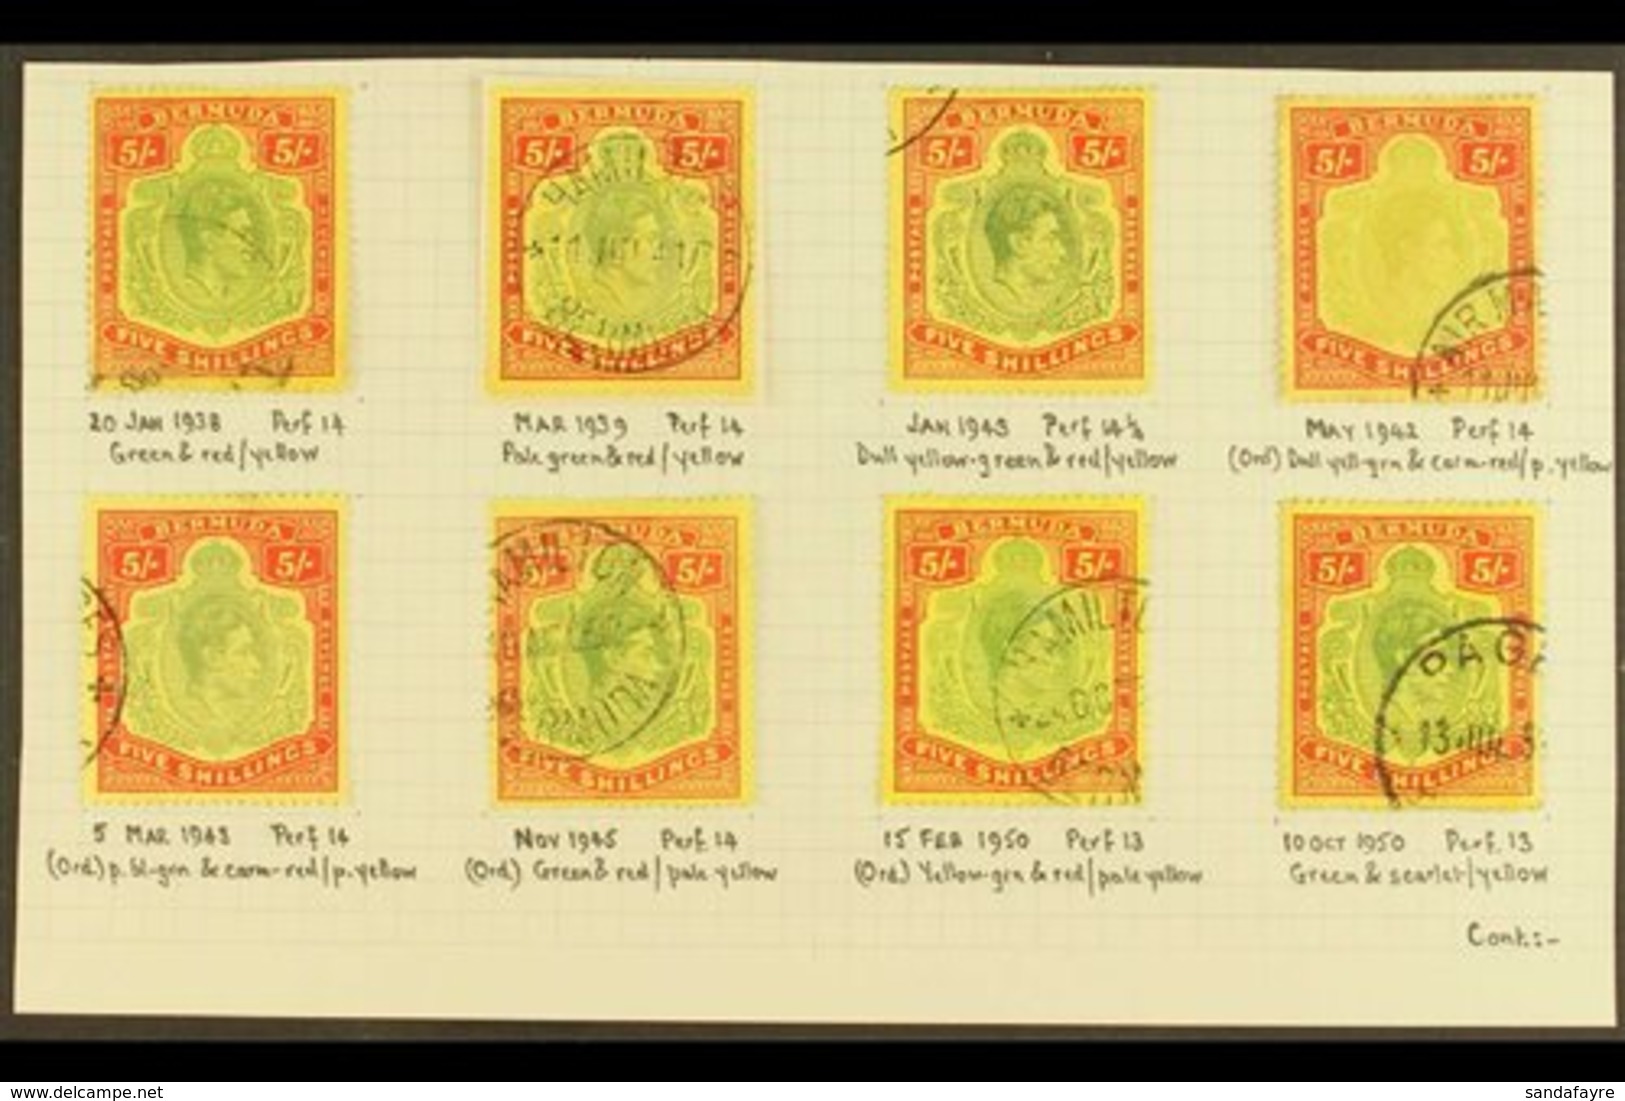 1938-53 5 SHILLING USED KEY PLATE COLLECTION  An All Different, Specialized Shade & Perf Collection Of Fine Cds Used "ke - Bermuda